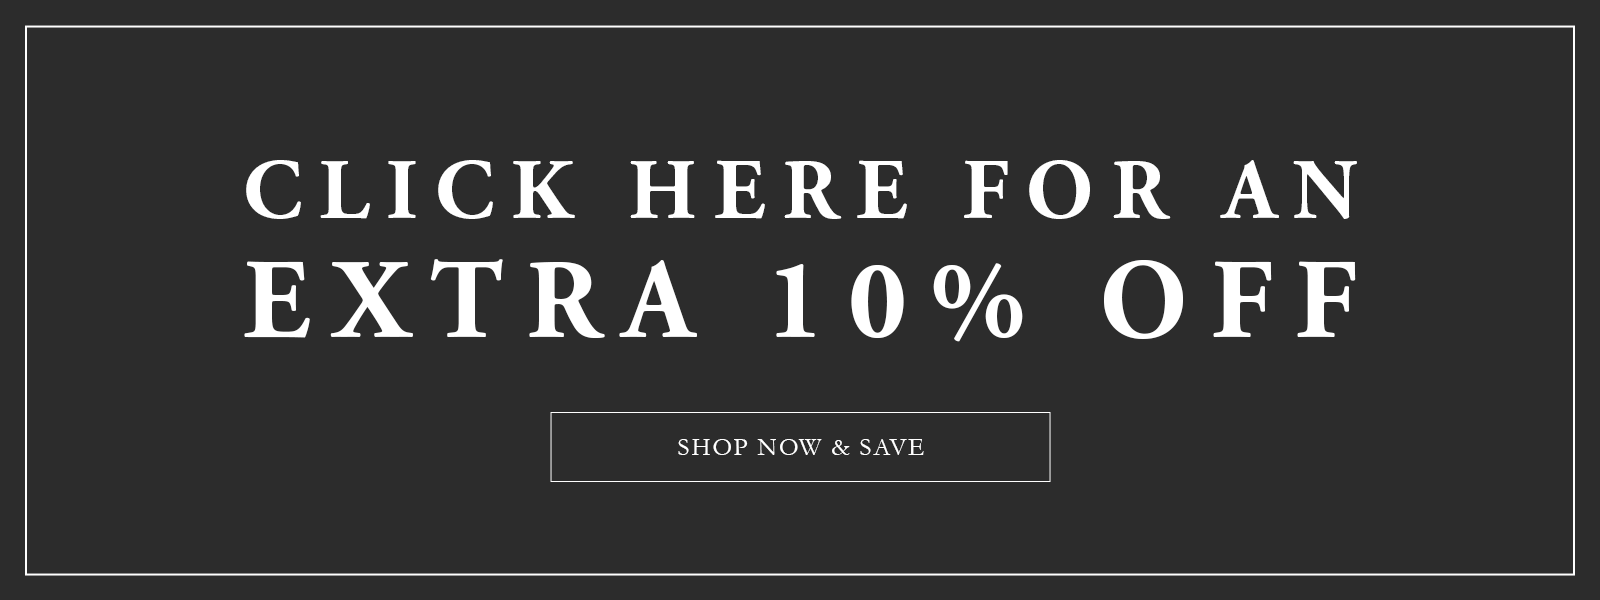 Click Here for an Extra 10% Off!